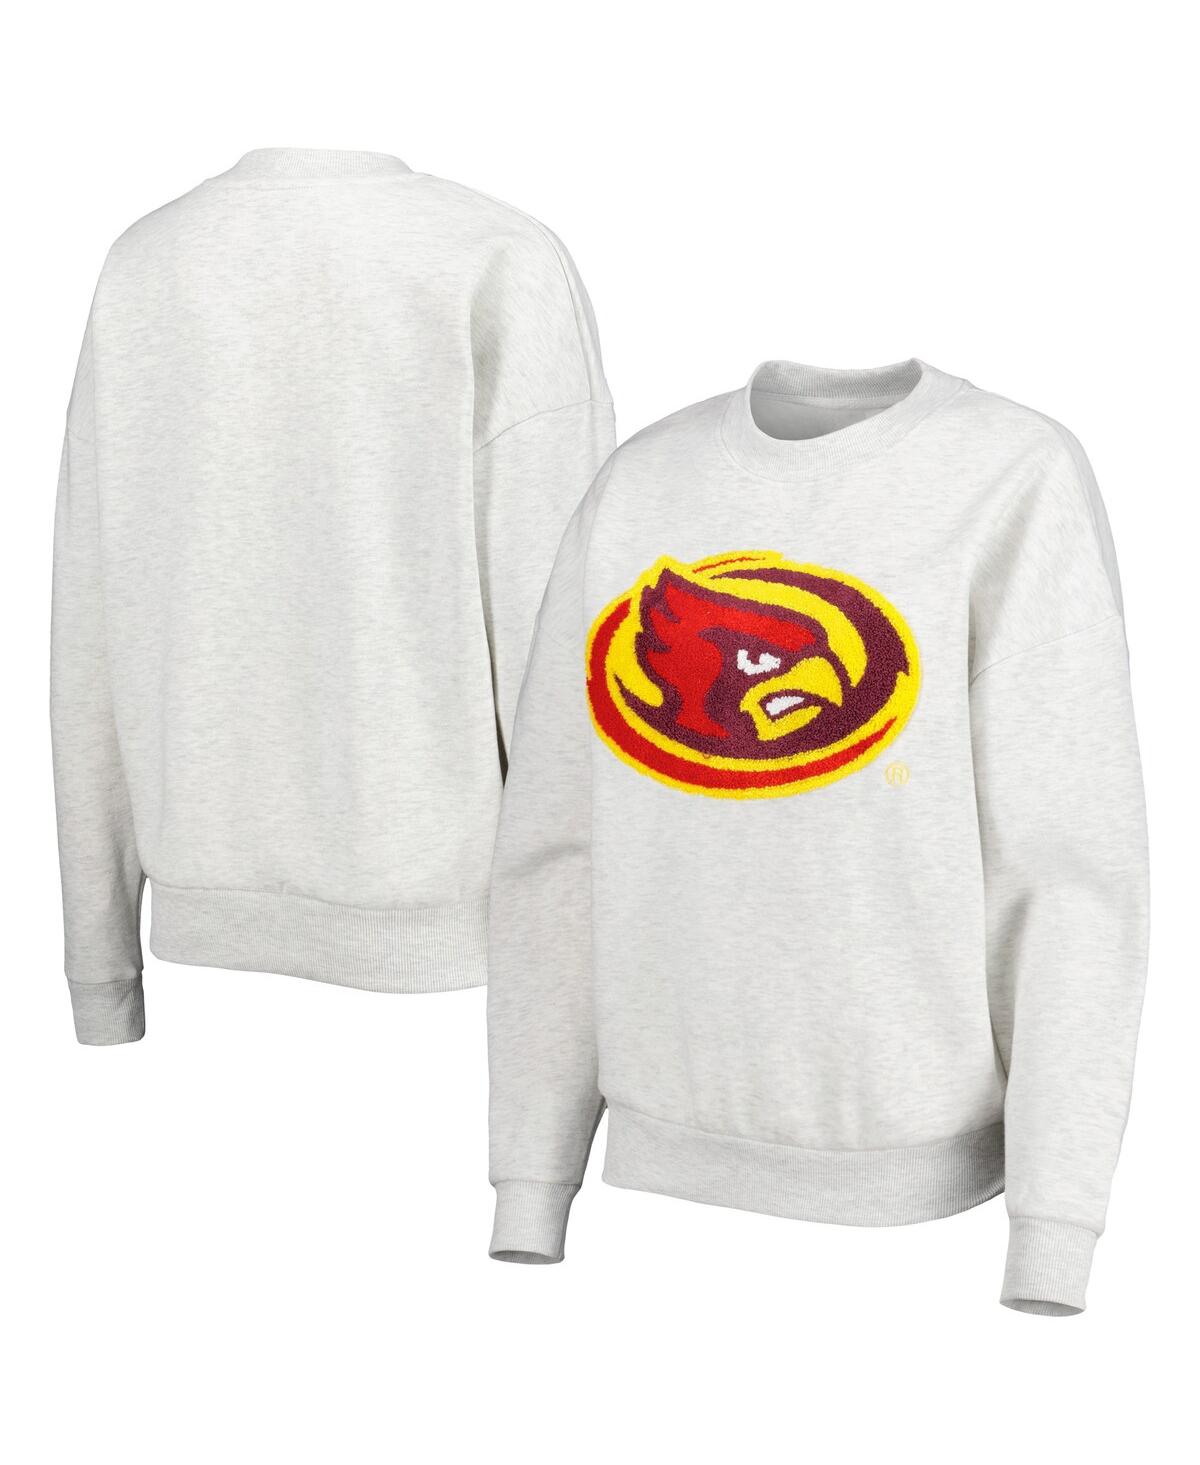 Women's Gameday Couture Heather Gray Iowa State Cyclones Chenille Patch Fleece Pullover Sweatshirt - Heather Gray